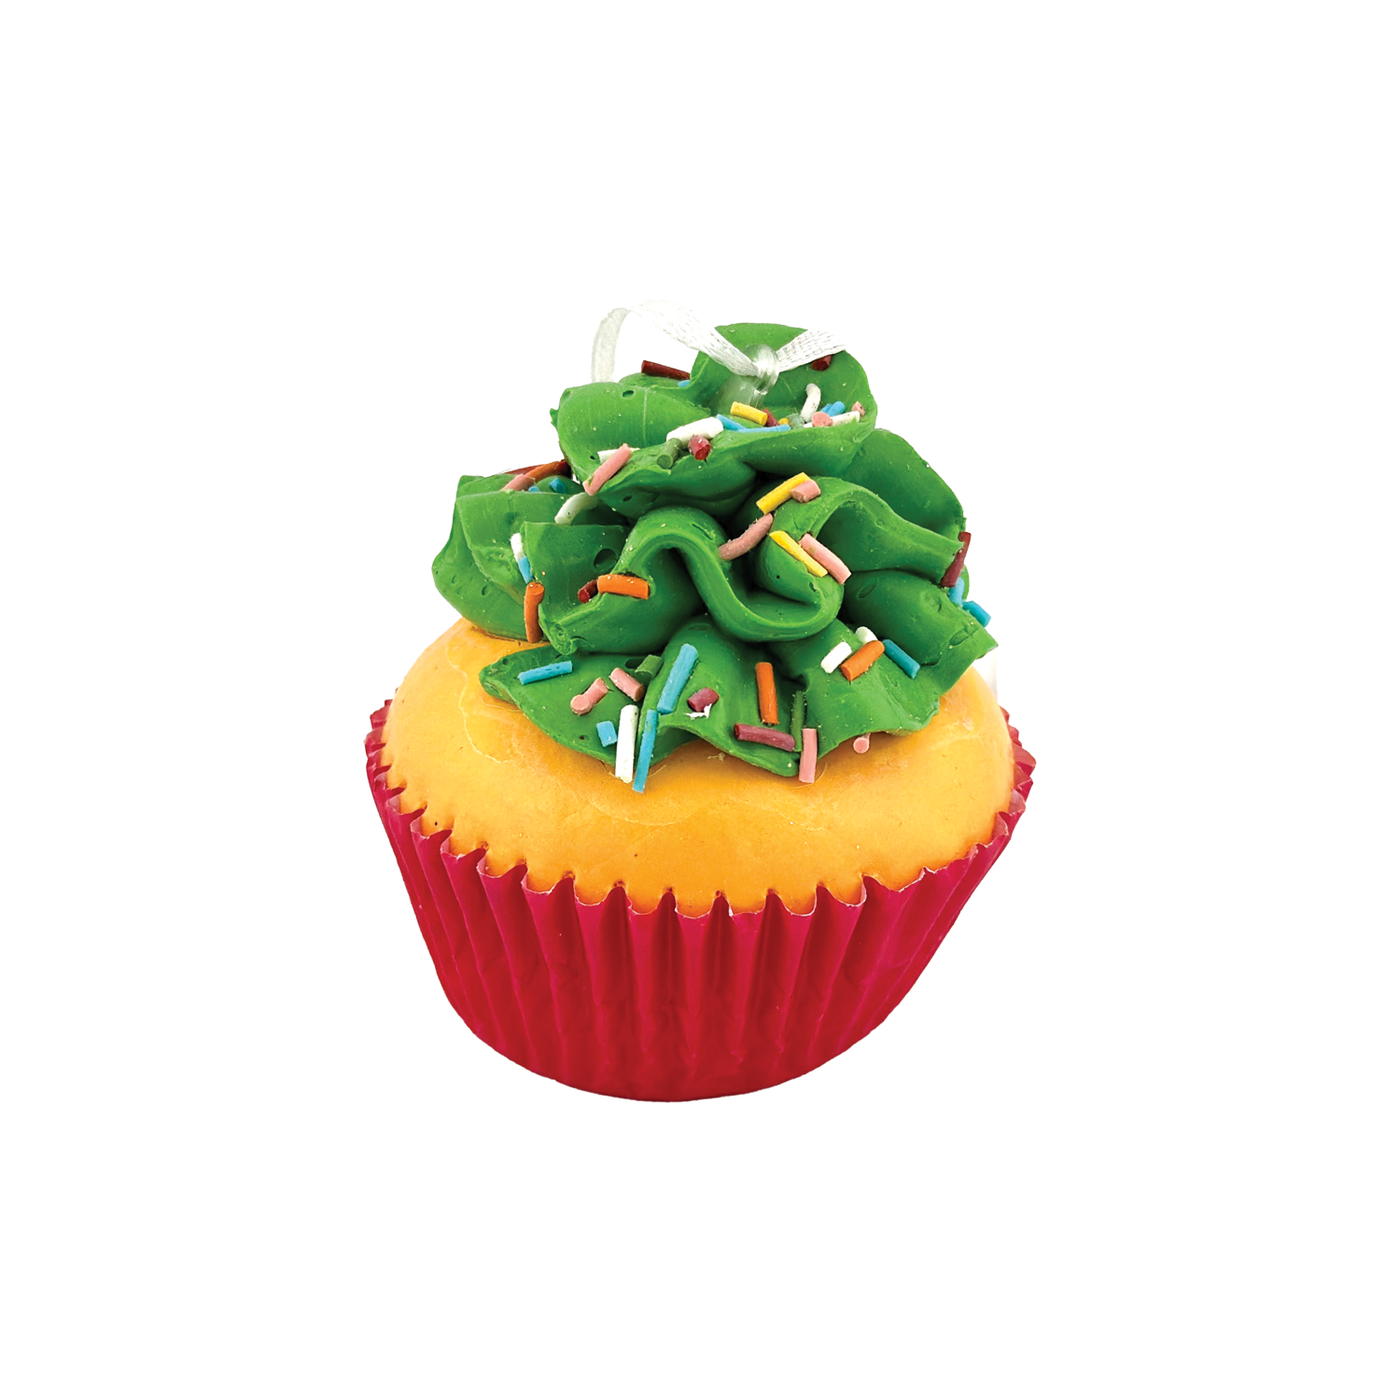 Foam Flower Cupcakes Ornament - Green With Sprinkles